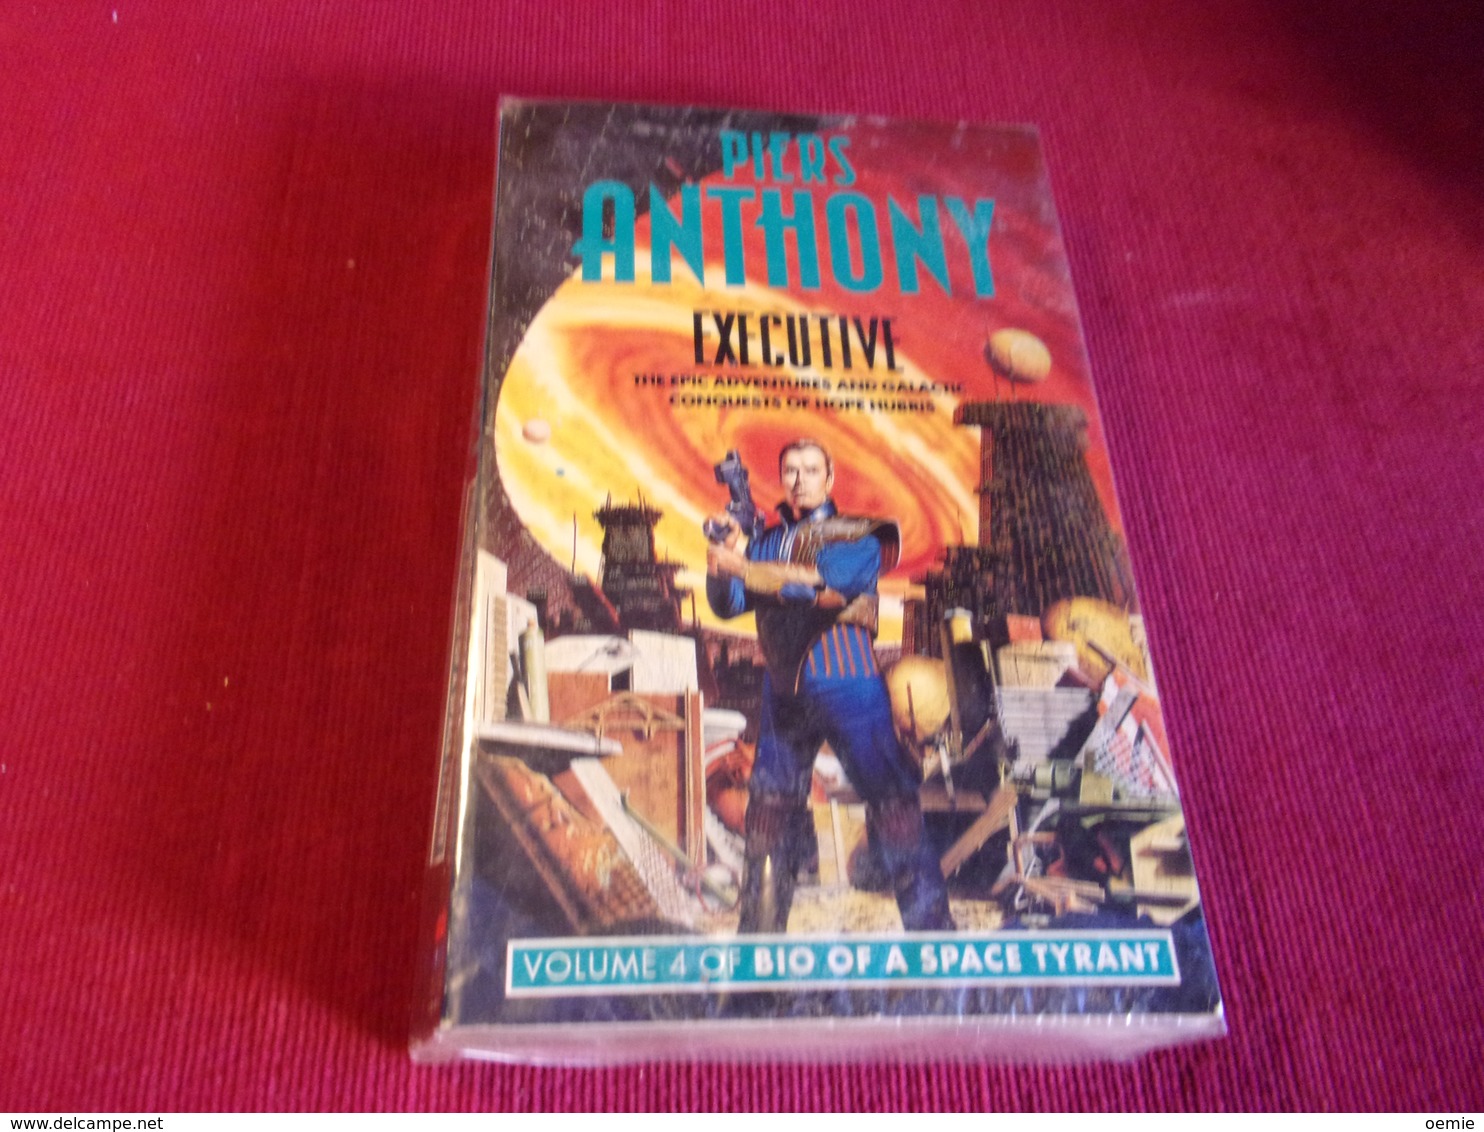 EXECUTIVE  VOLUME 4  °°°° PIERS ANTHONY - Sciencefiction